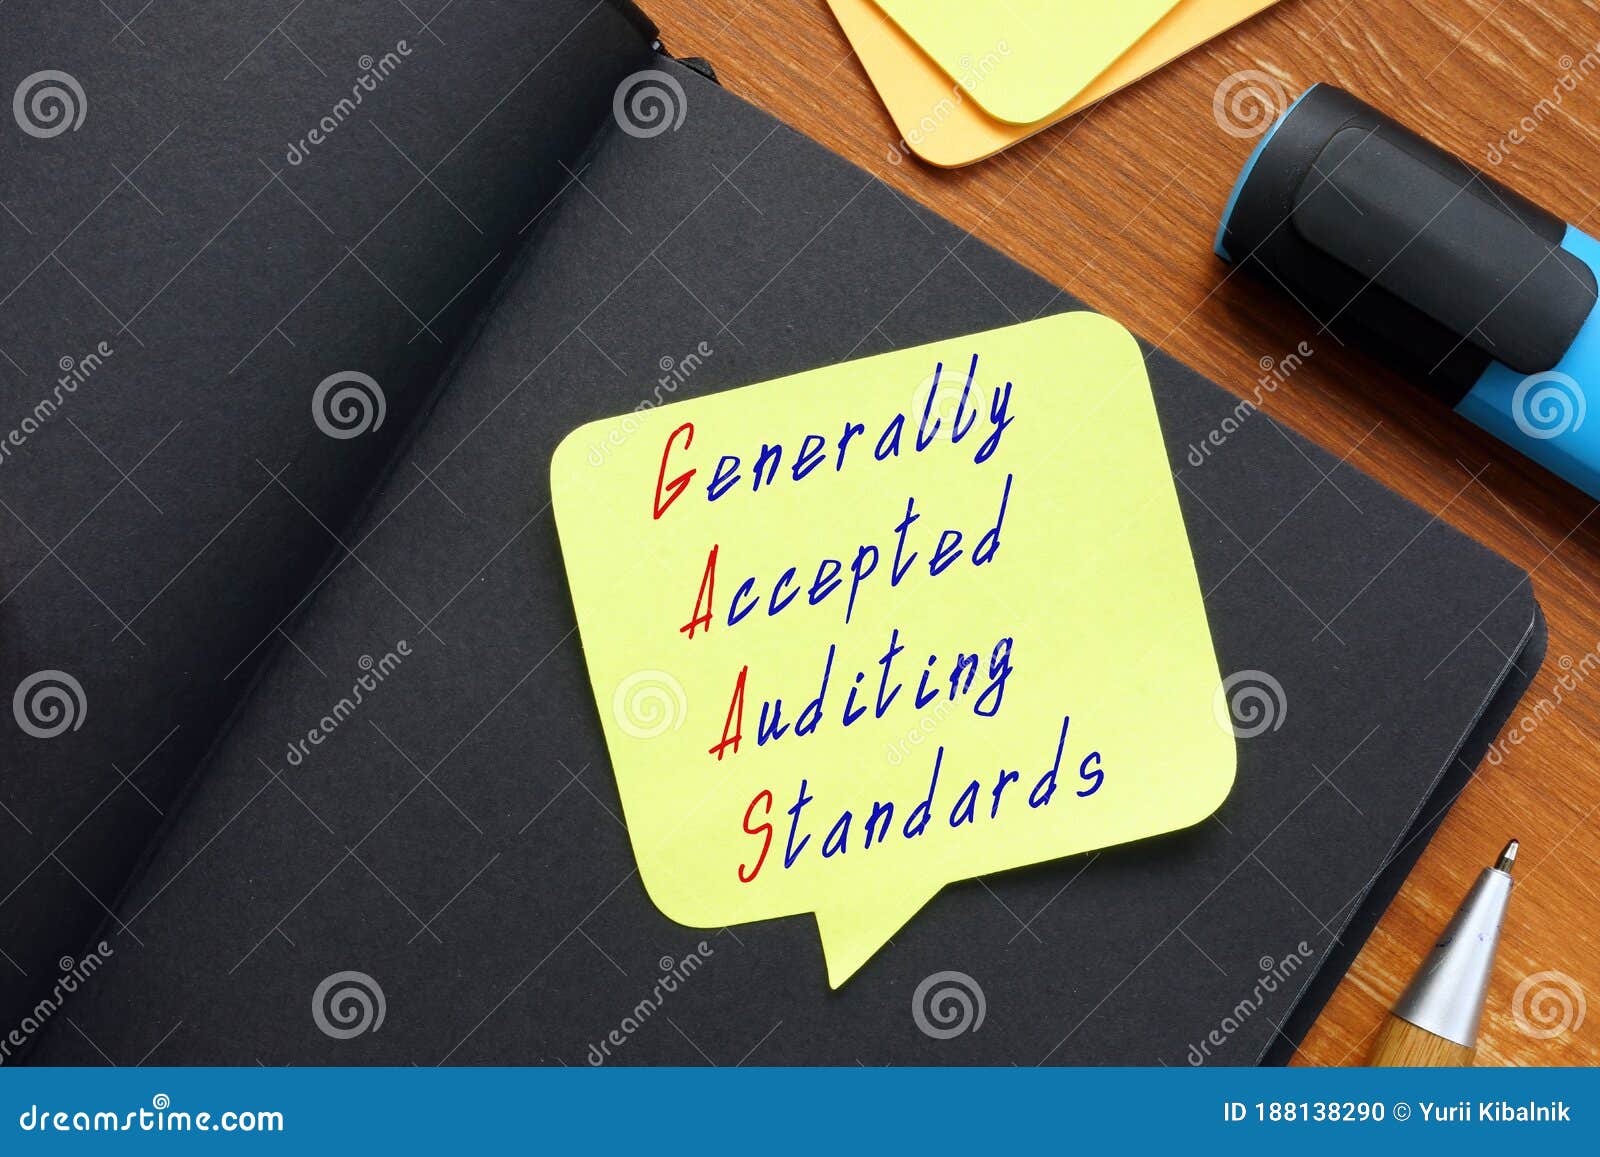 generally accepted auditing standards are